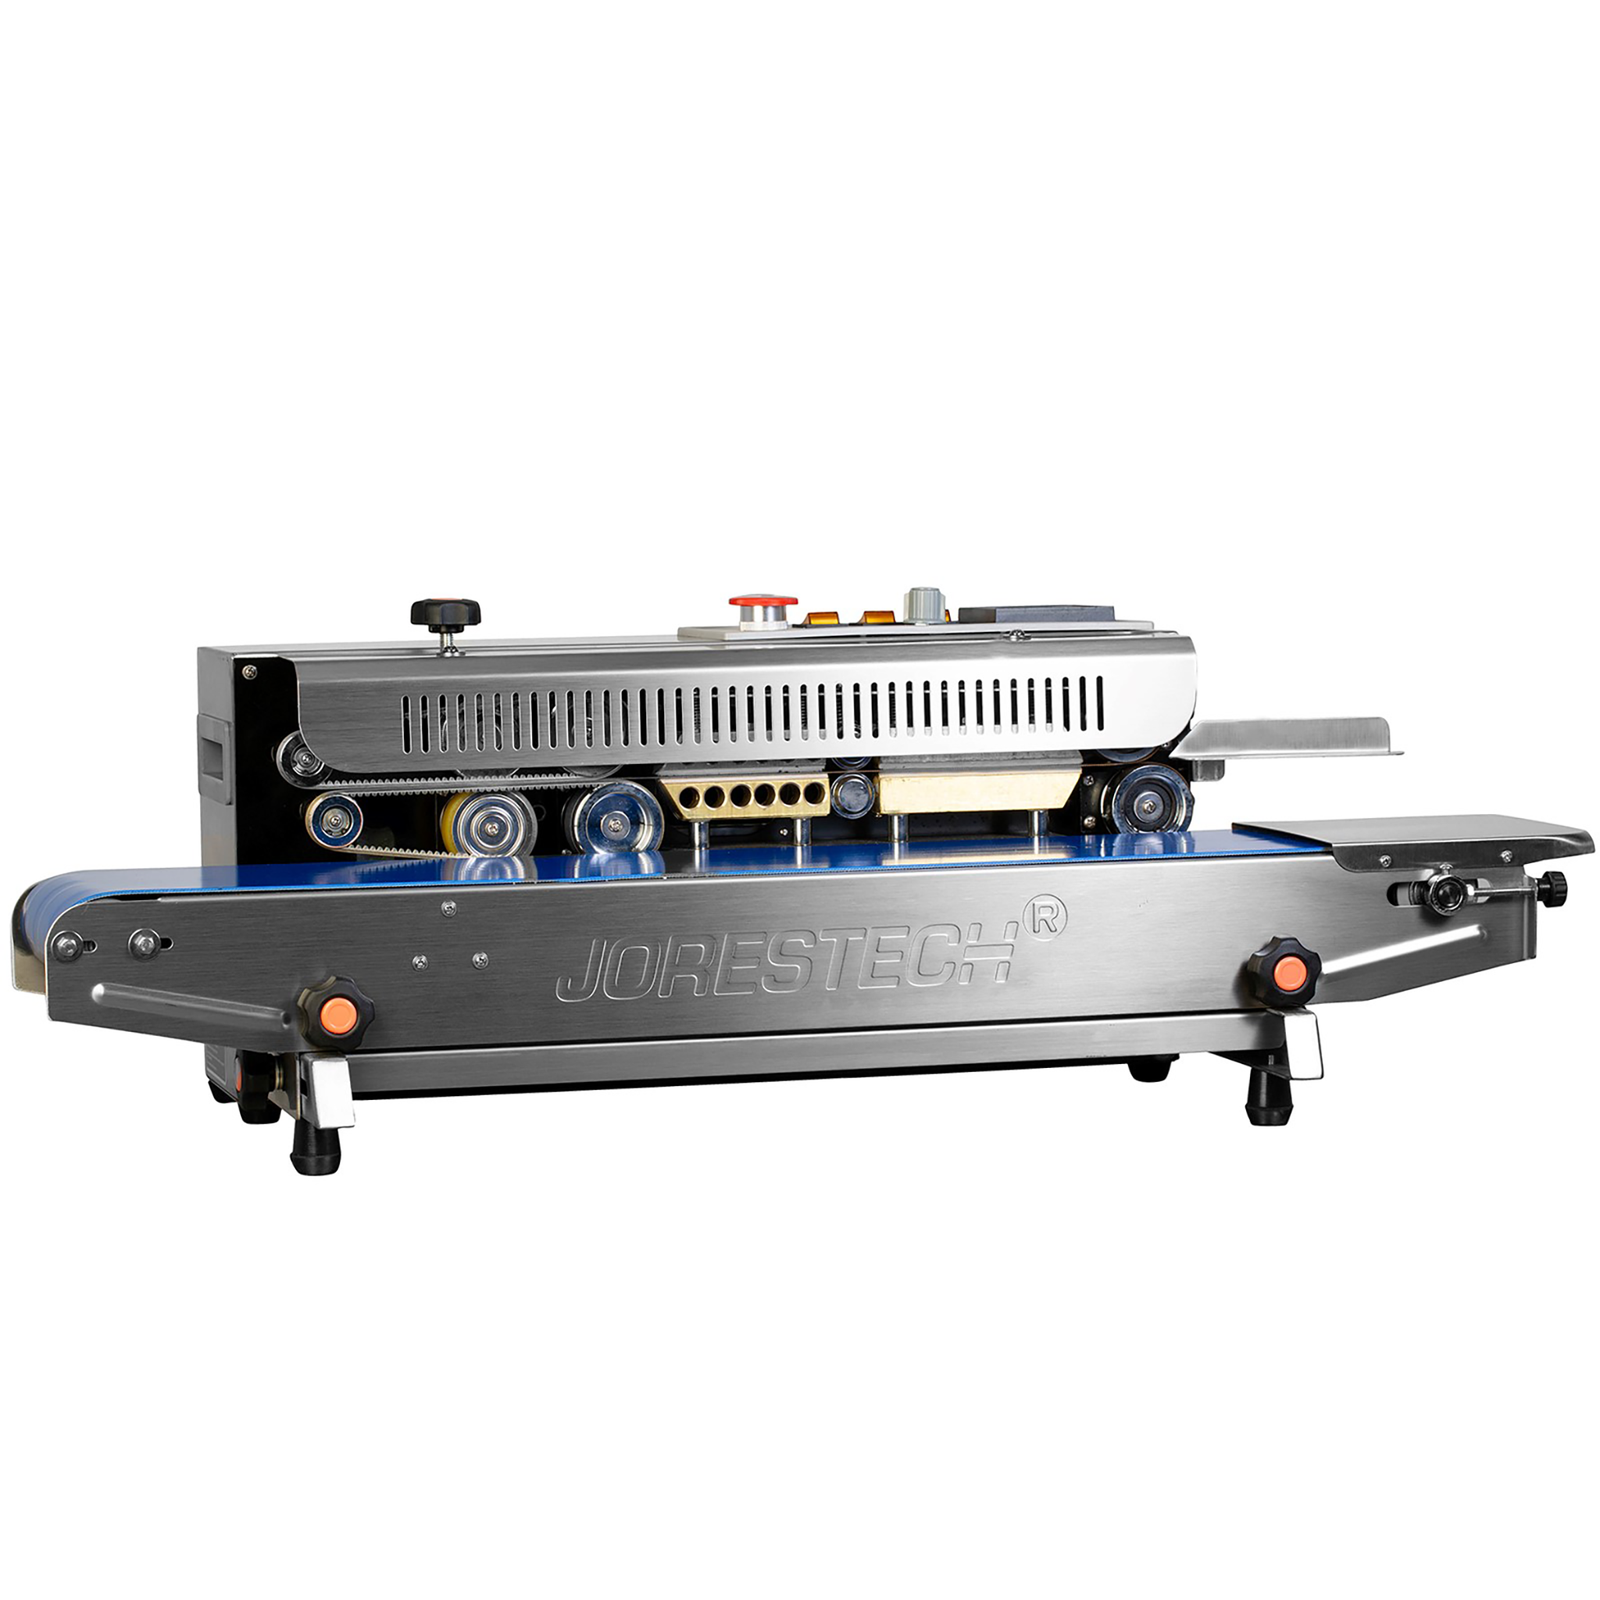 JORES TECHNOLOGIES® SS continuous band sealer with digital temperature control panel set for horizontal applications